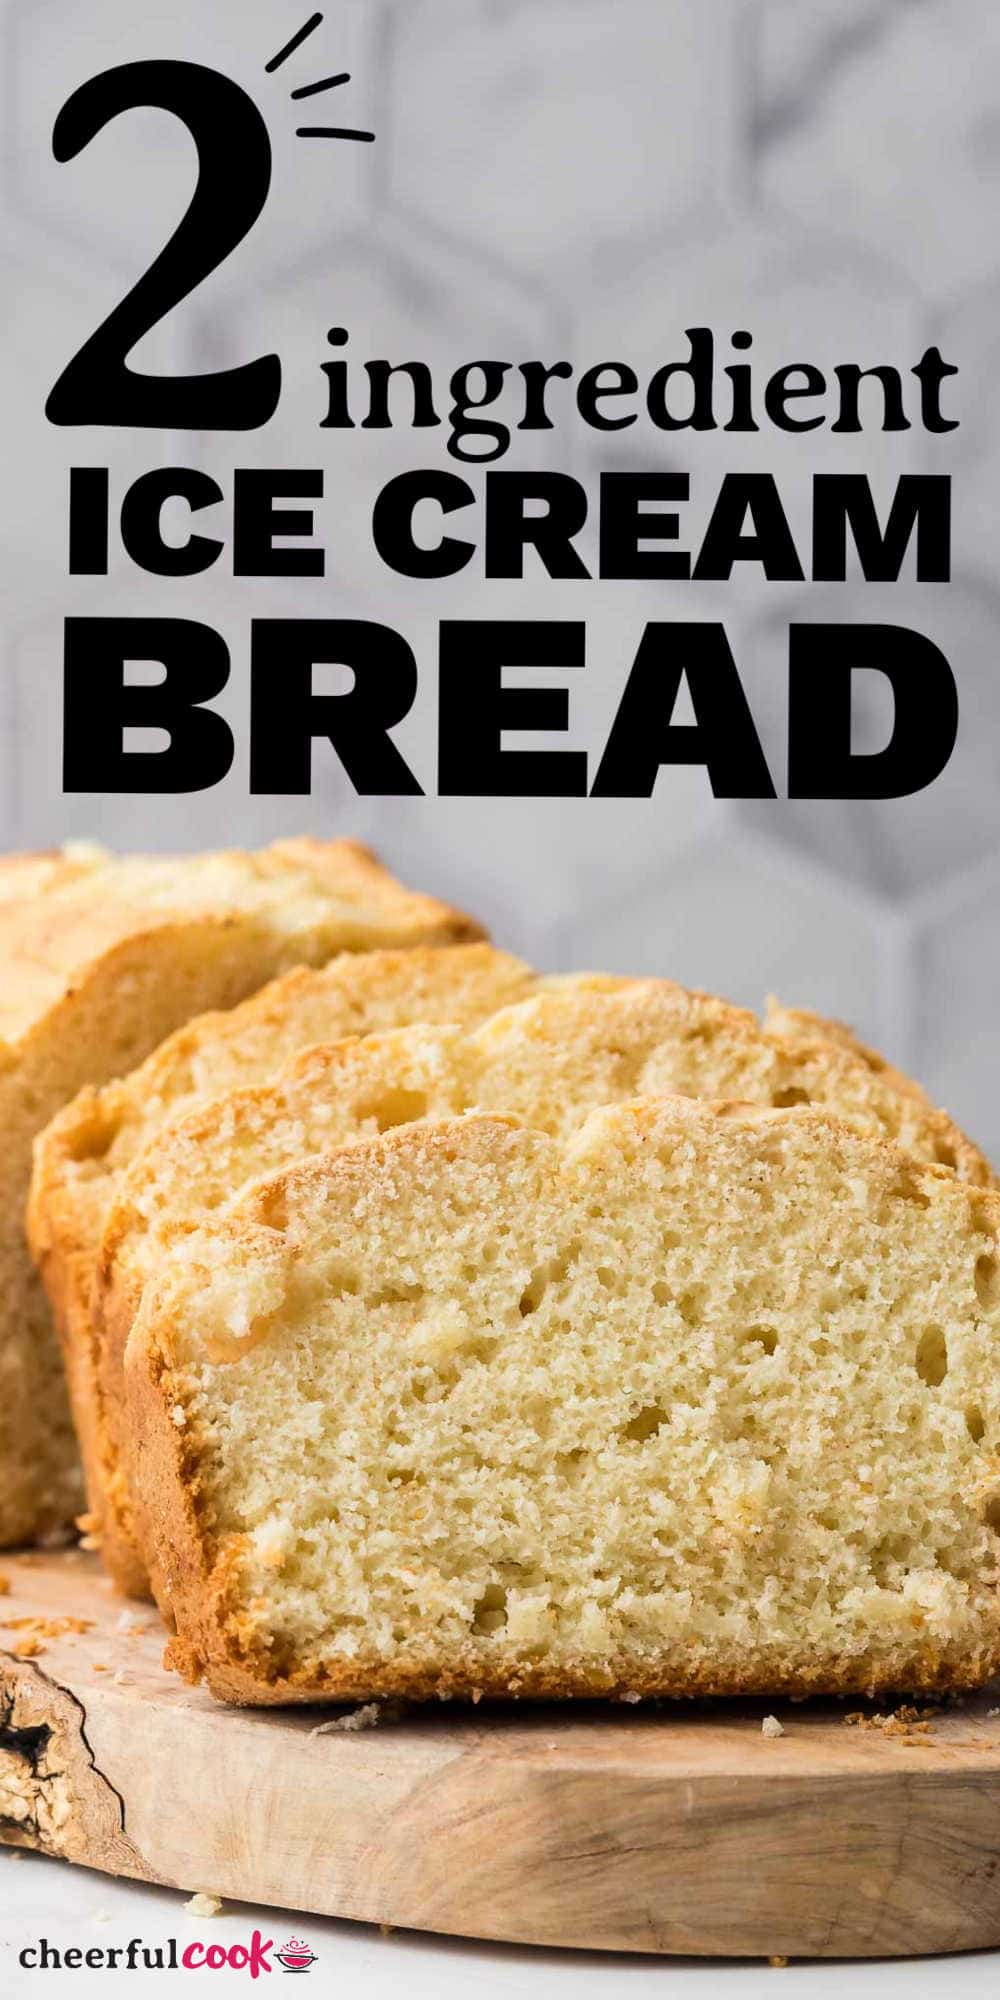 This two-ingredient ice cream bread turns your favorite frozen dessert into a beautiful loaf of bread with infinite flavor possibilities! This is one quick bread recipe you don’t need baking lessons for! #cheerfulcook #icecream #icecreambread #2ingredient #recipe #easy via @cheerfulcook